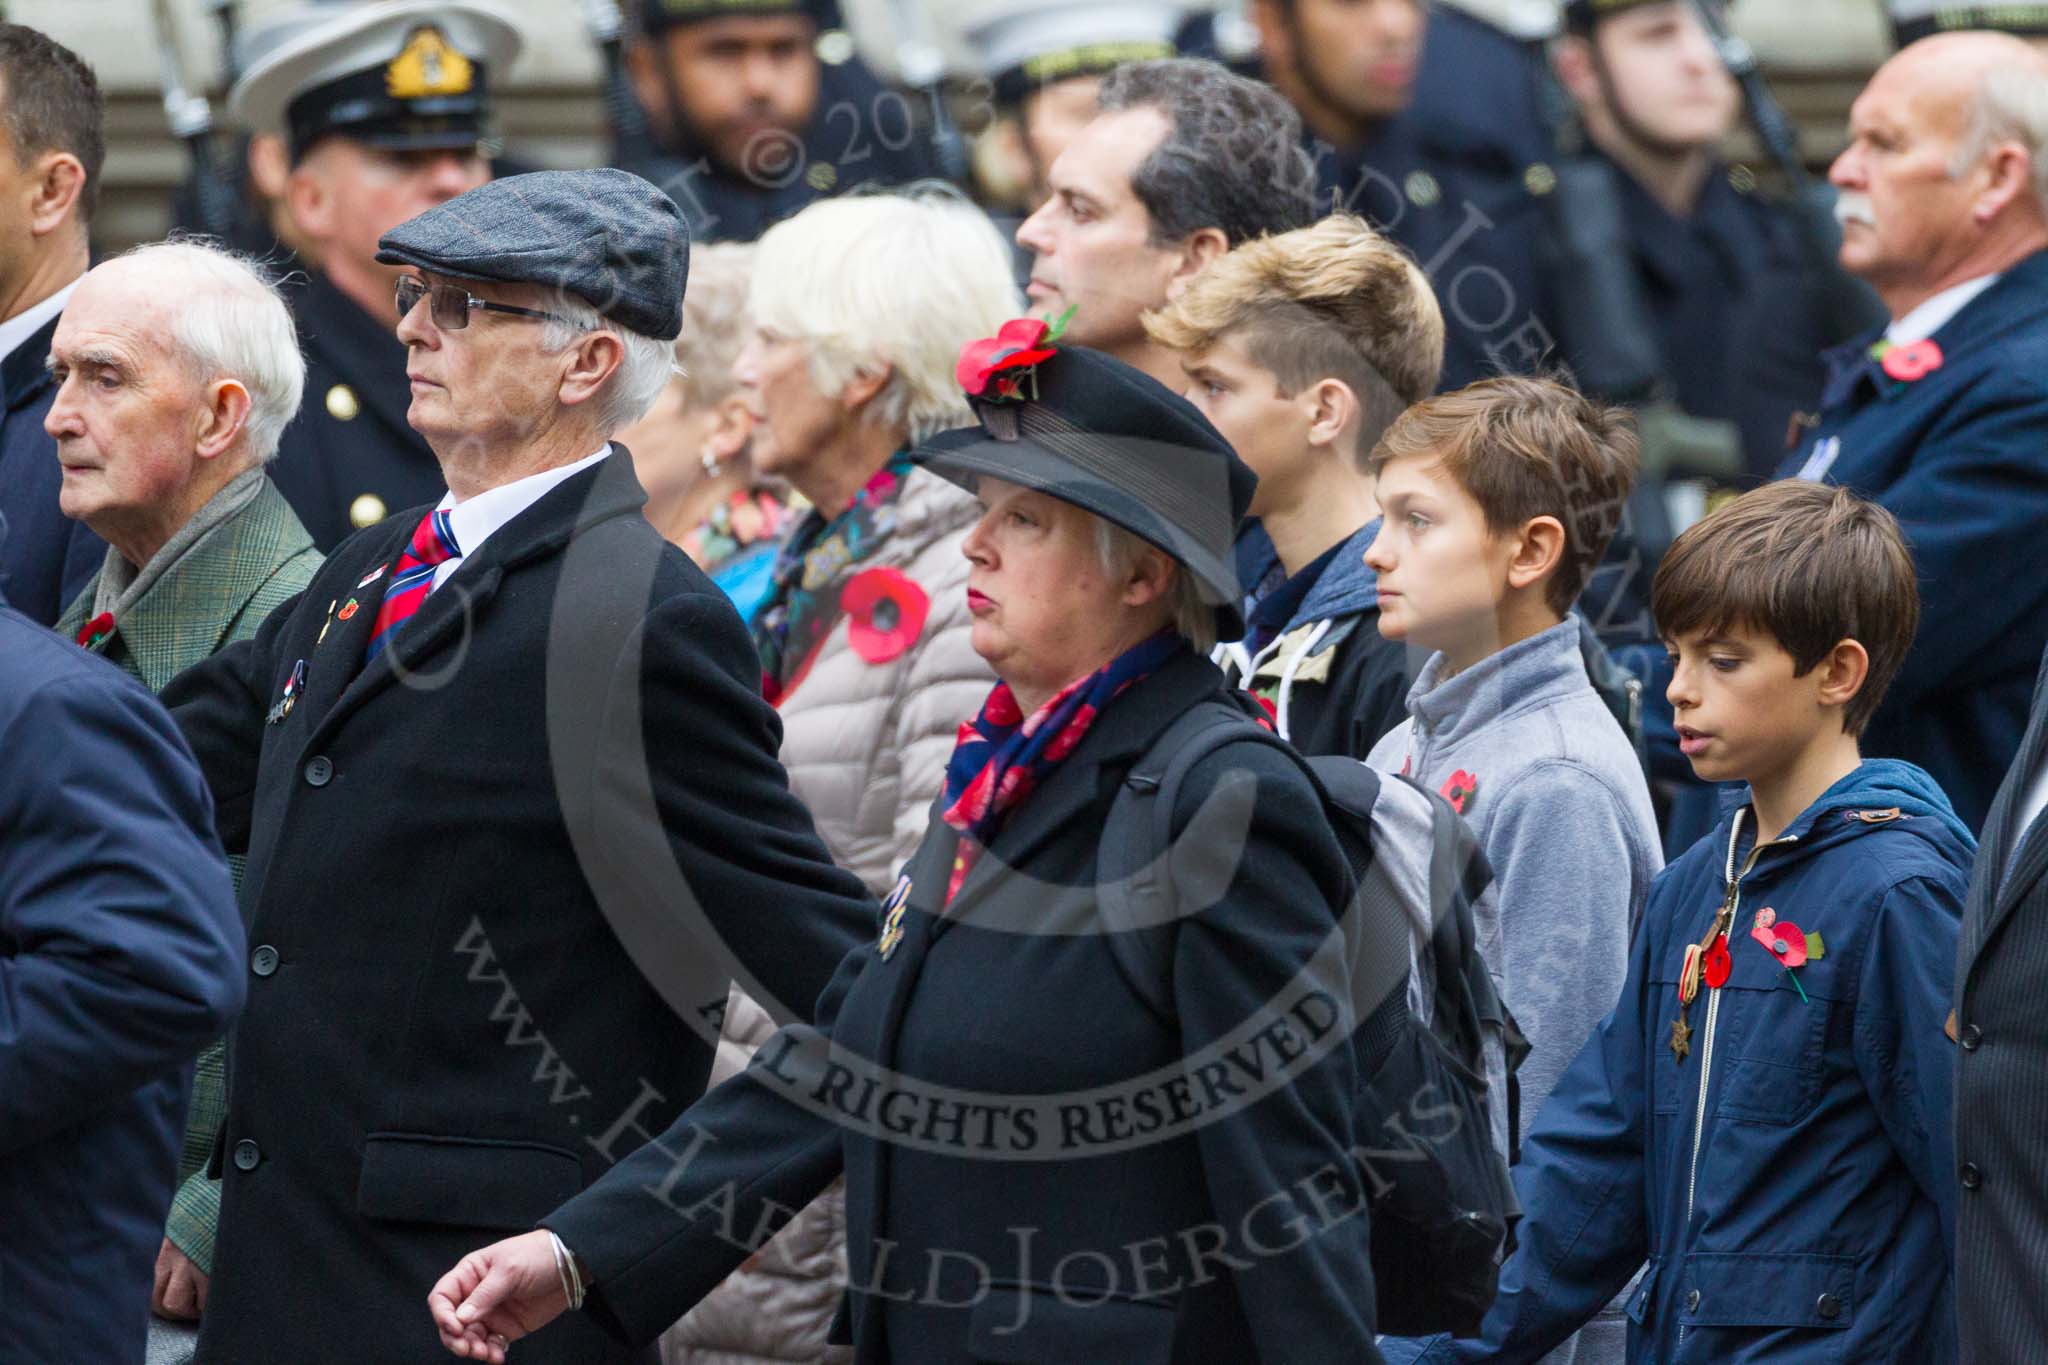 Remembrance Sunday at the Cenotaph 2015: Group M23, Civilians Representing Families.
Cenotaph, Whitehall, London SW1,
London,
Greater London,
United Kingdom,
on 08 November 2015 at 12:17, image #1560